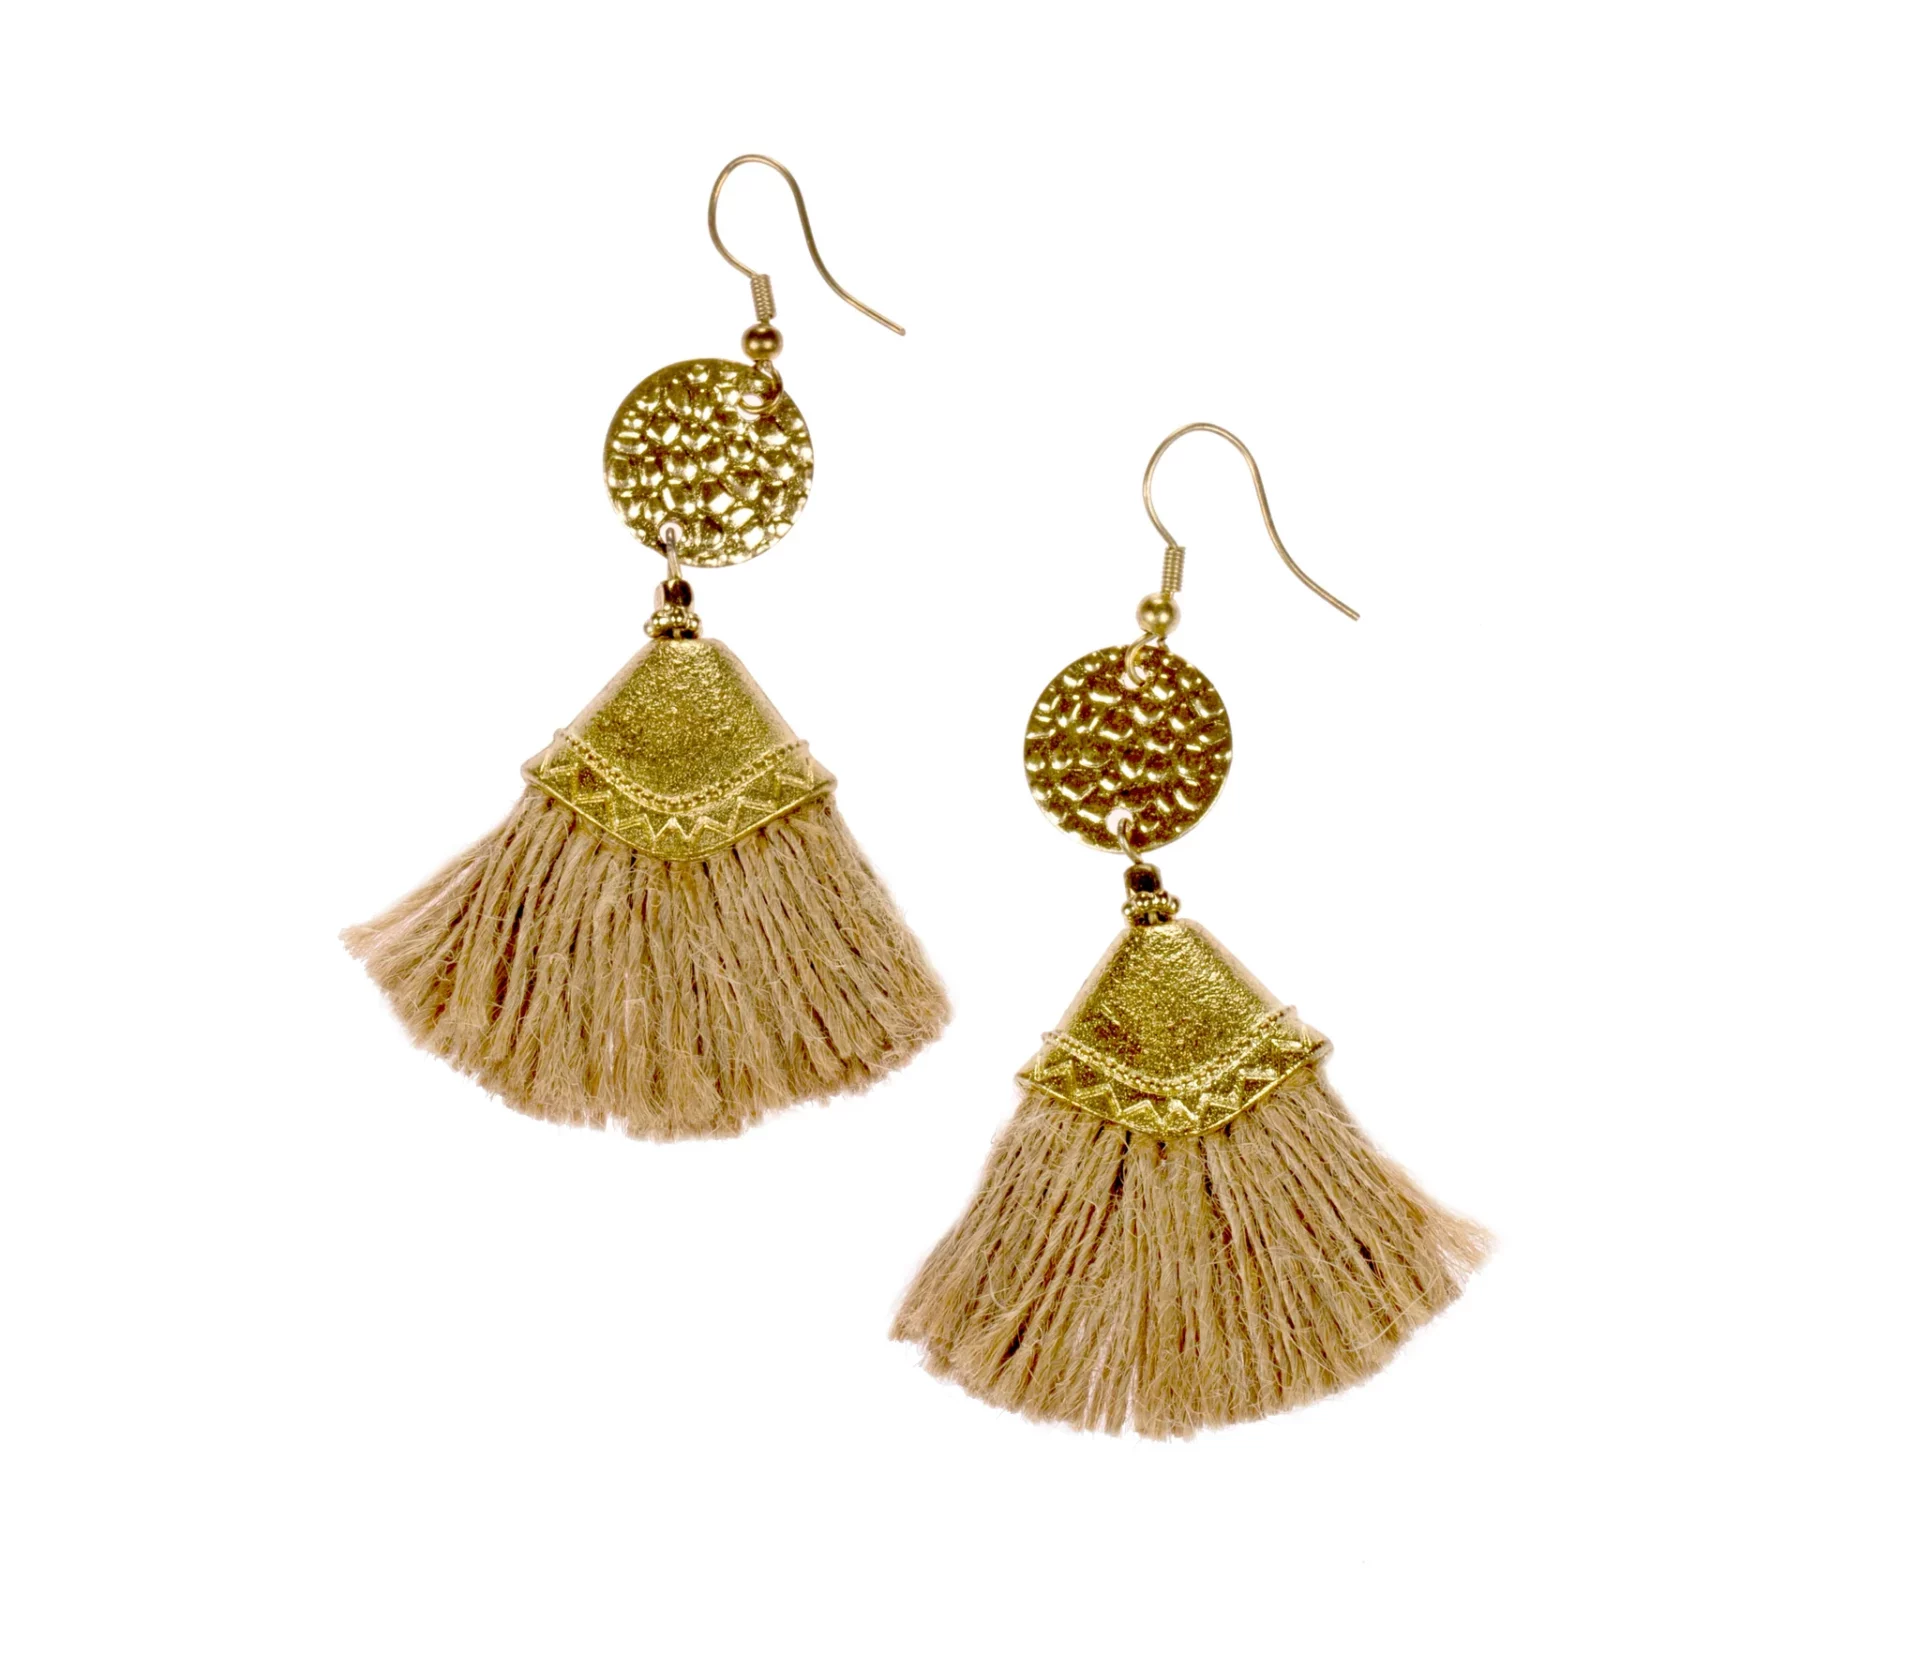 rohini earrings by daughters of the ganges